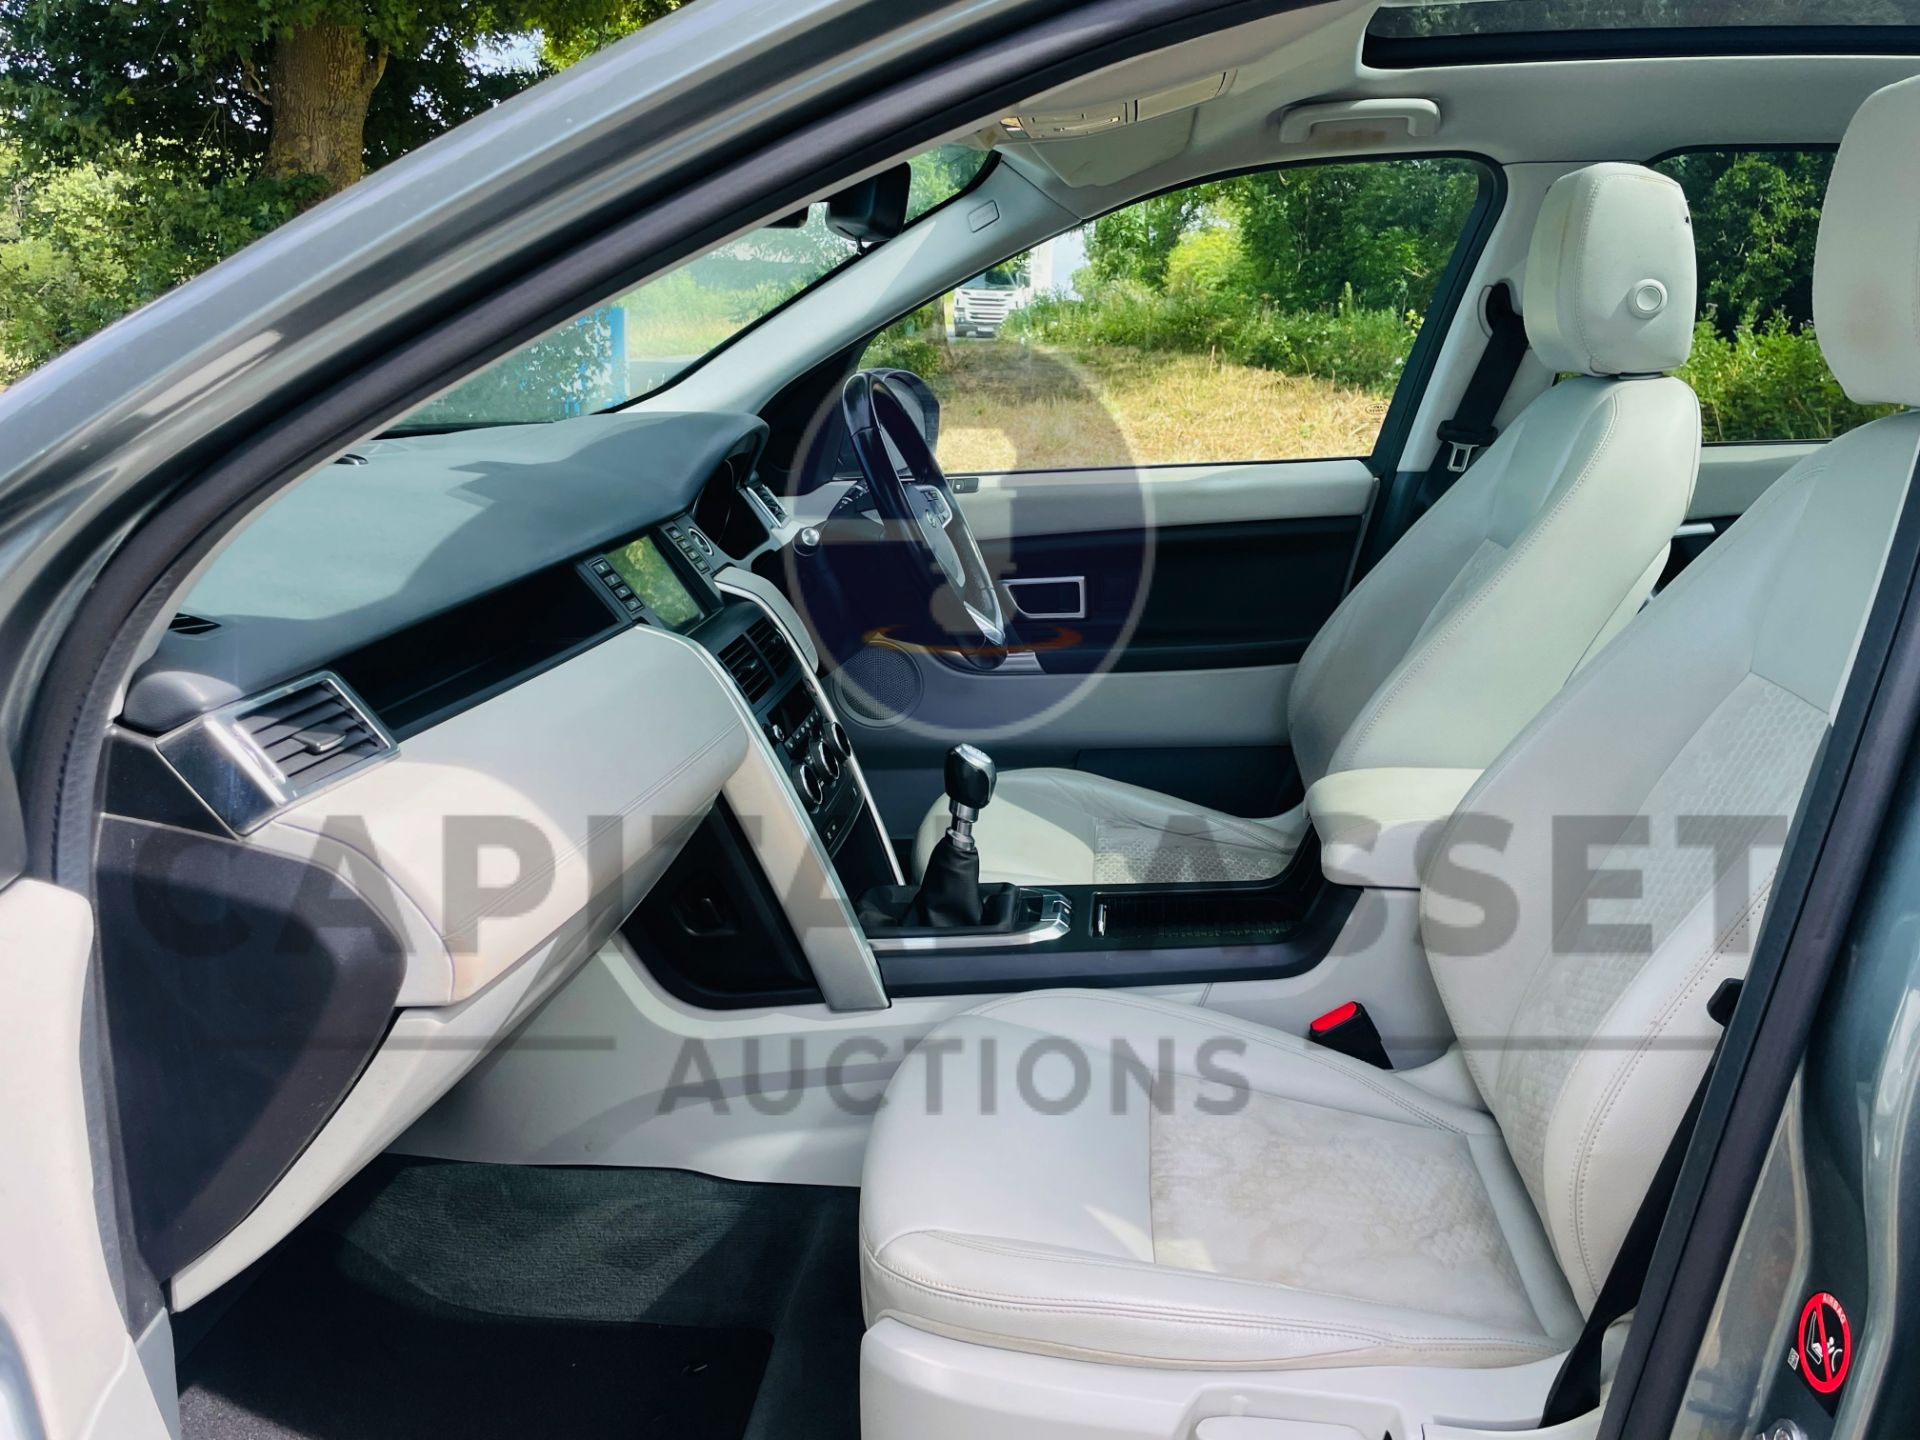 (On Sale) LAND ROVER DISCOVERY SPORT *SE TECH* SUV (2019 - EURO 6) 2.0 ED4 - STOP/START *HUGE SPEC* - Image 25 of 55